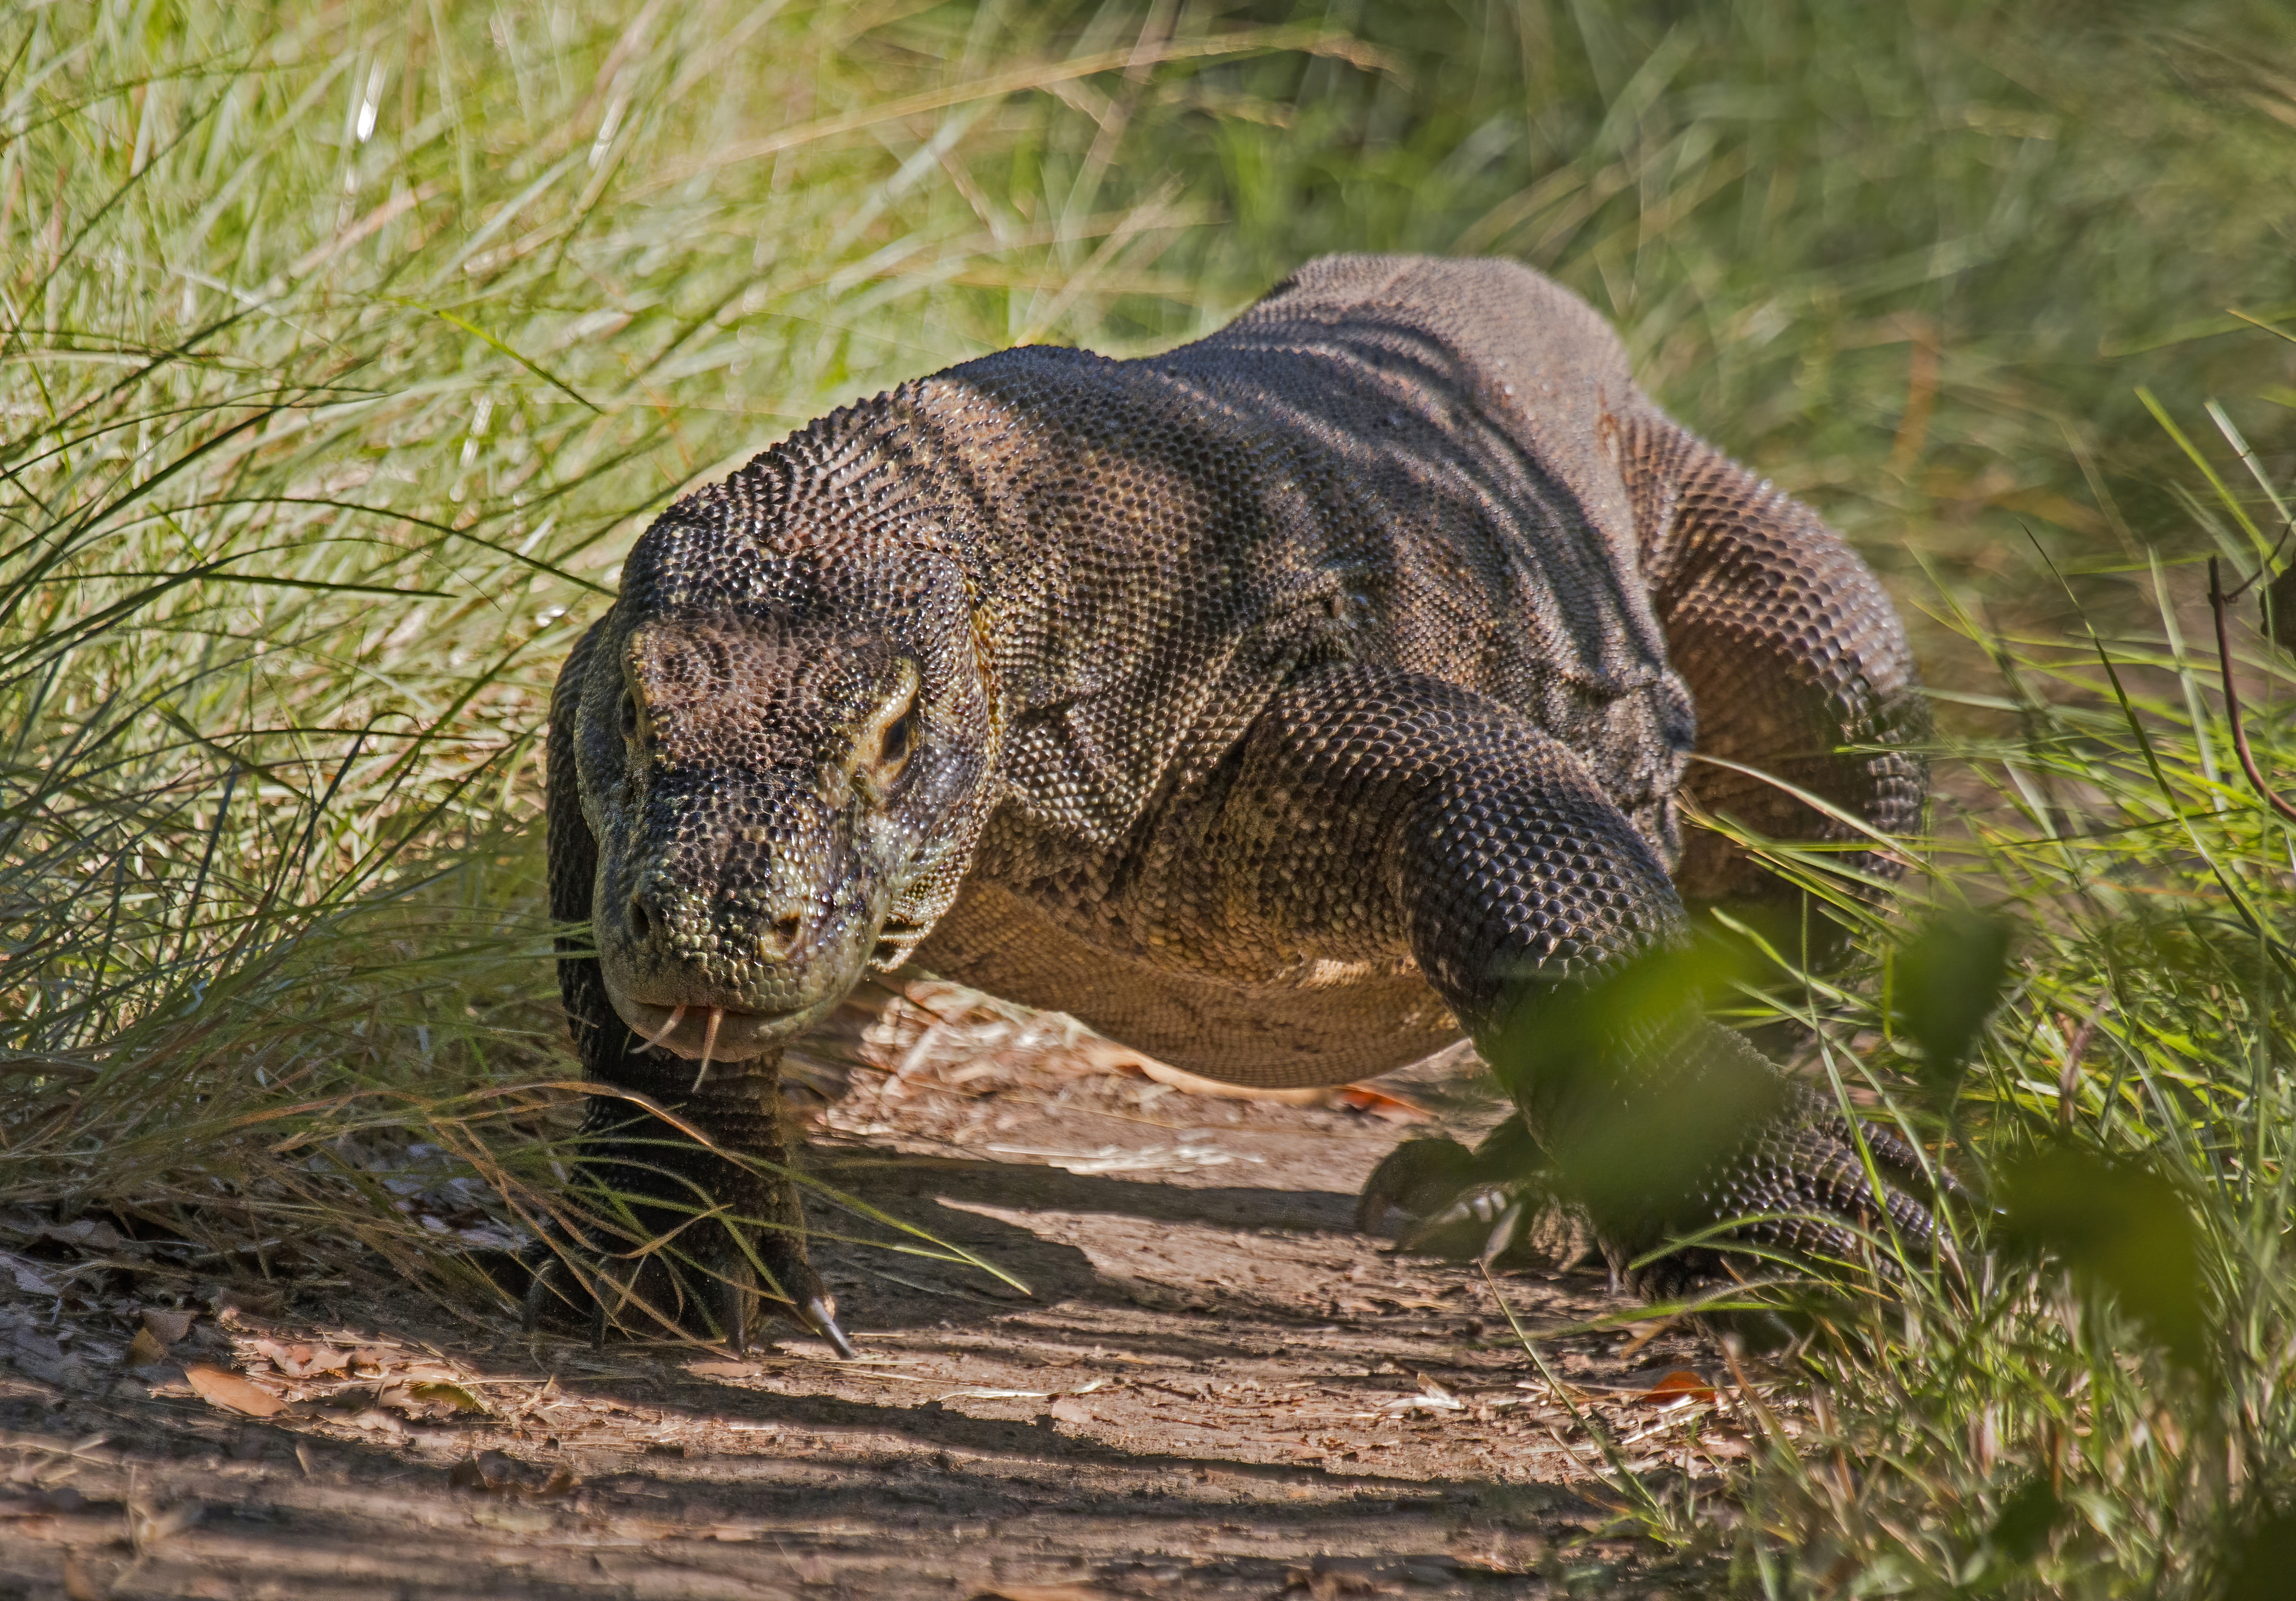 What are Komodo dragons called?